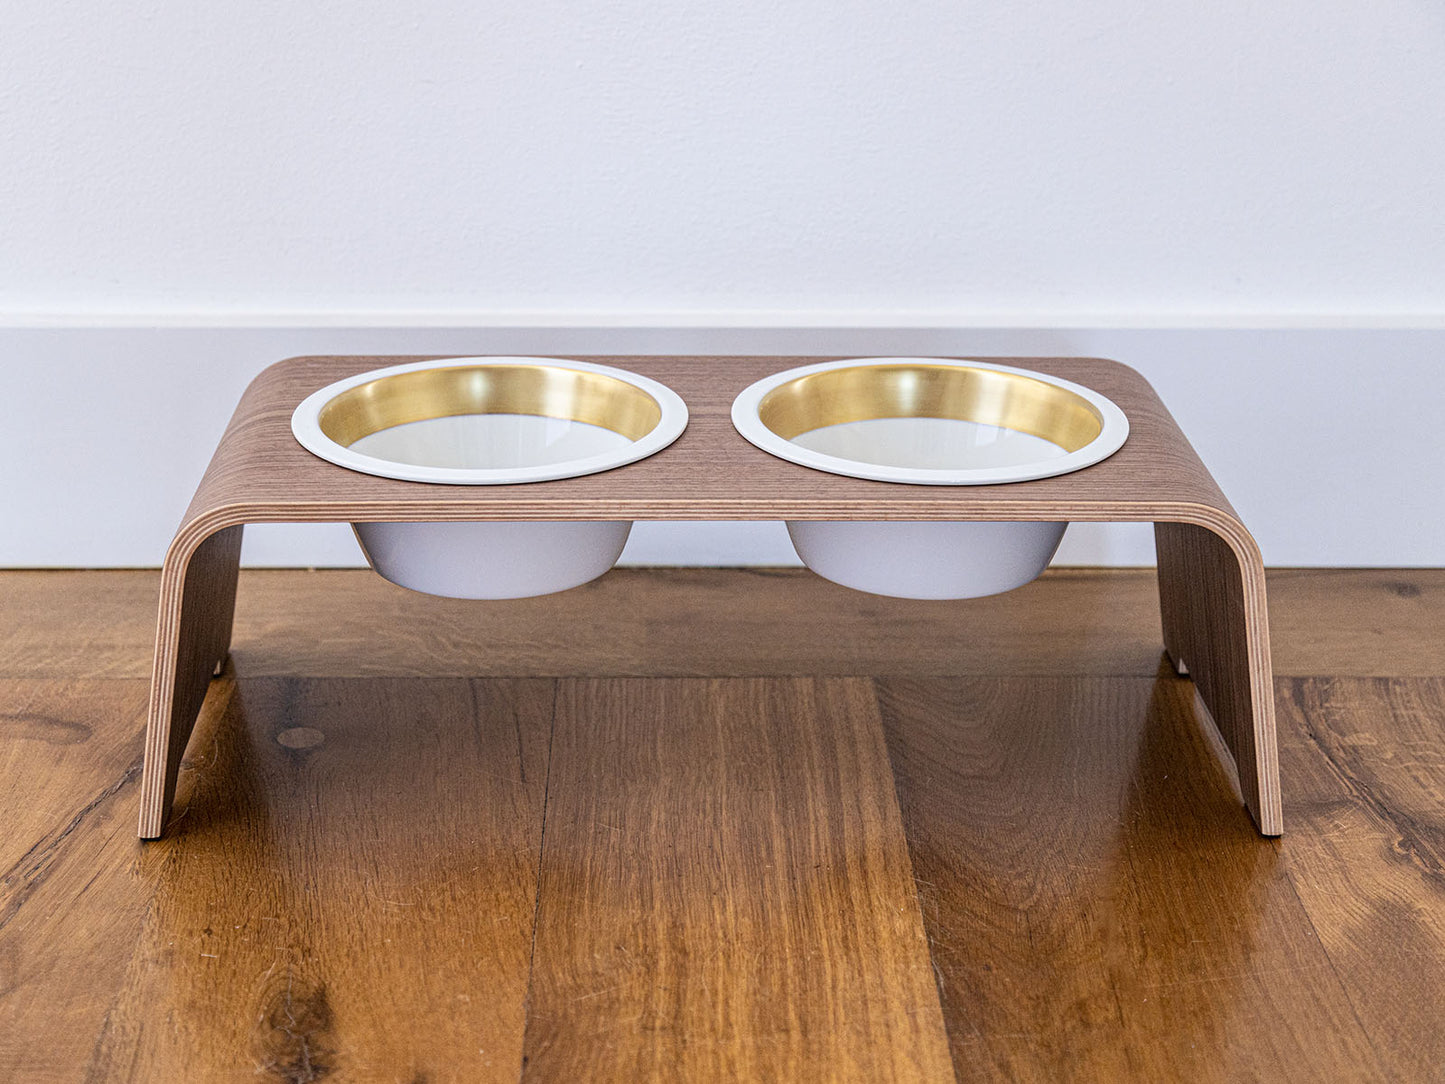 Surcharge GOLD Edition for a porcelain bowl of the dogBar® M or M-small